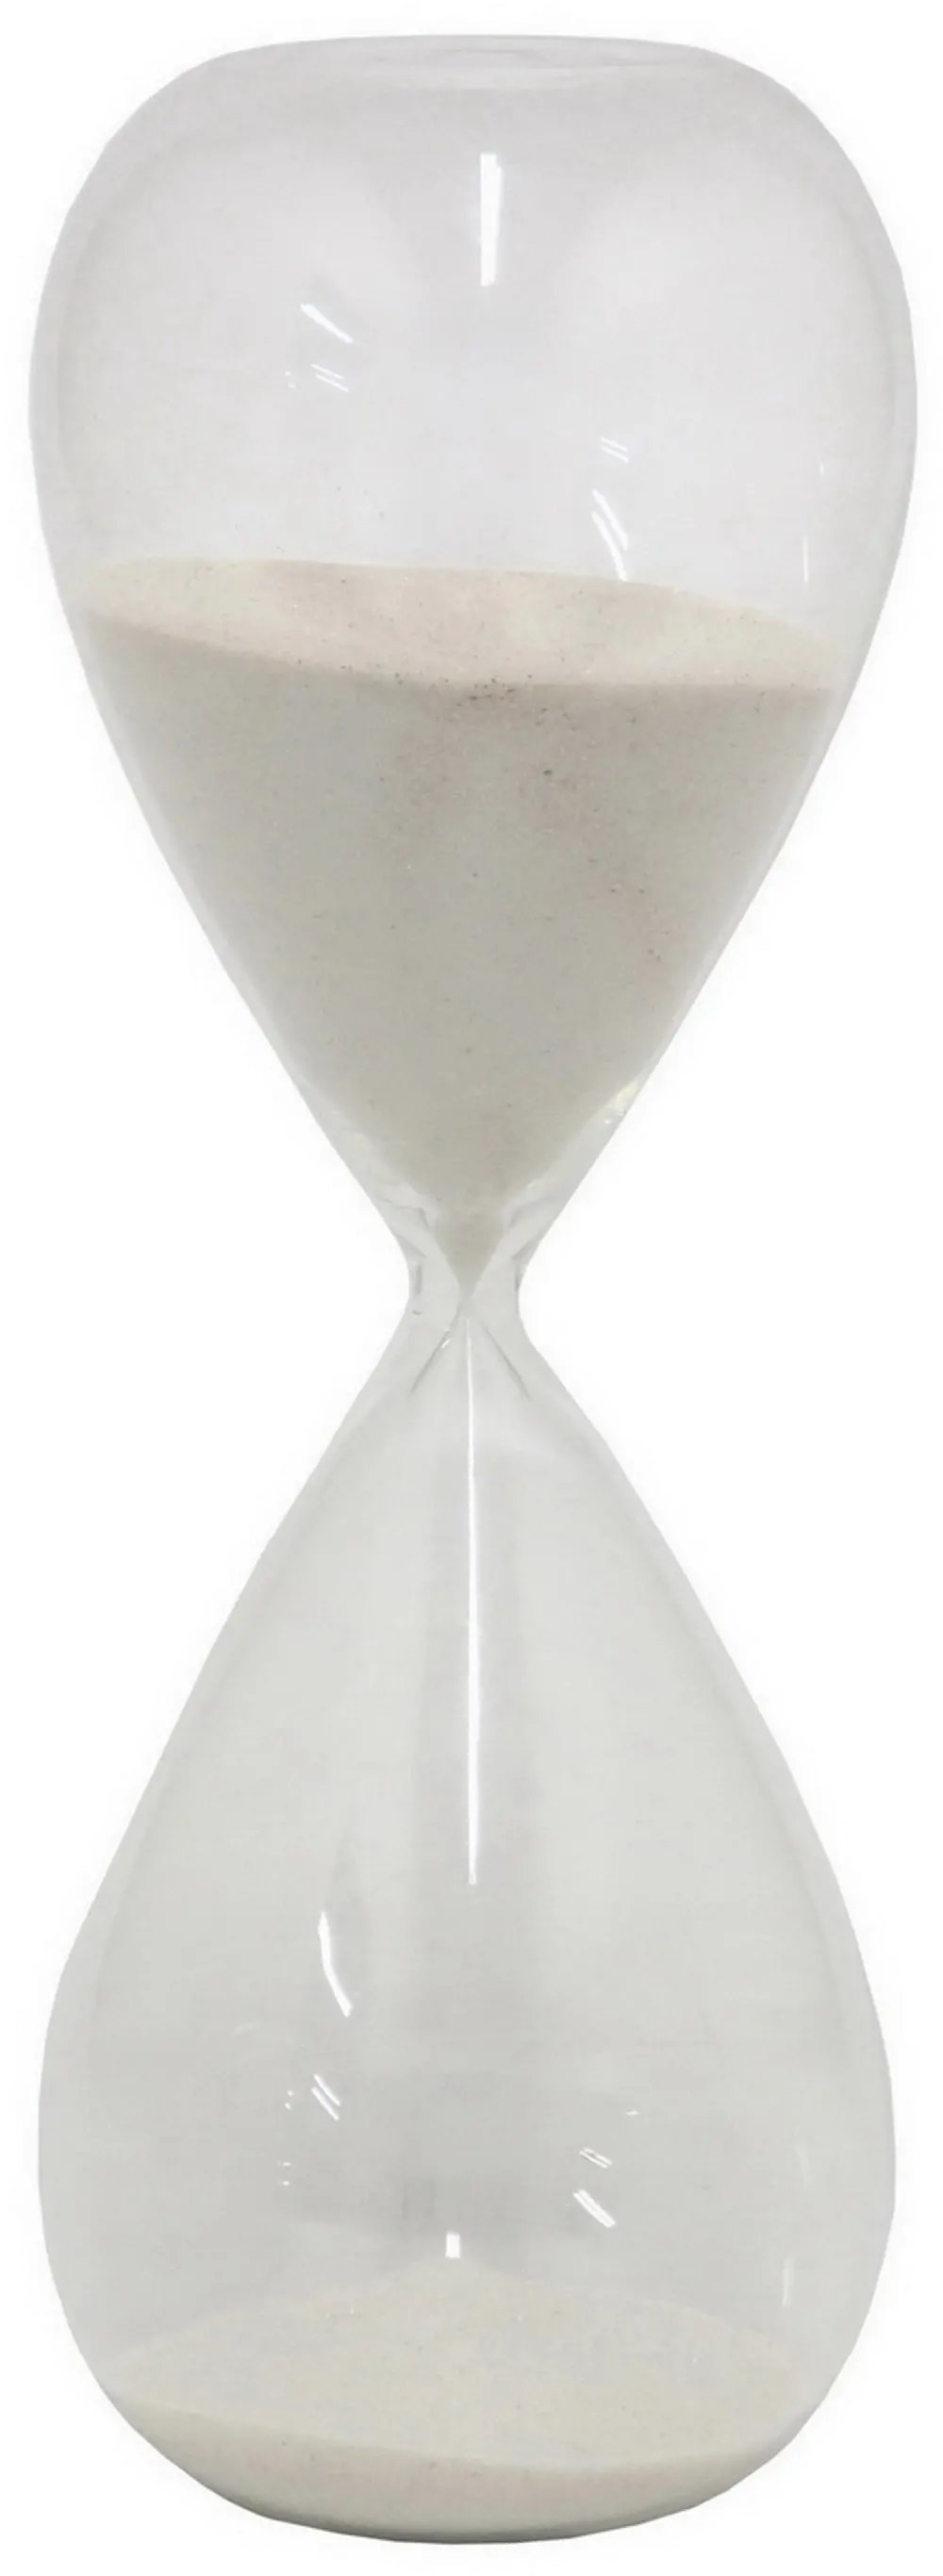 Hourglass Sand 60 Minute Timer-1